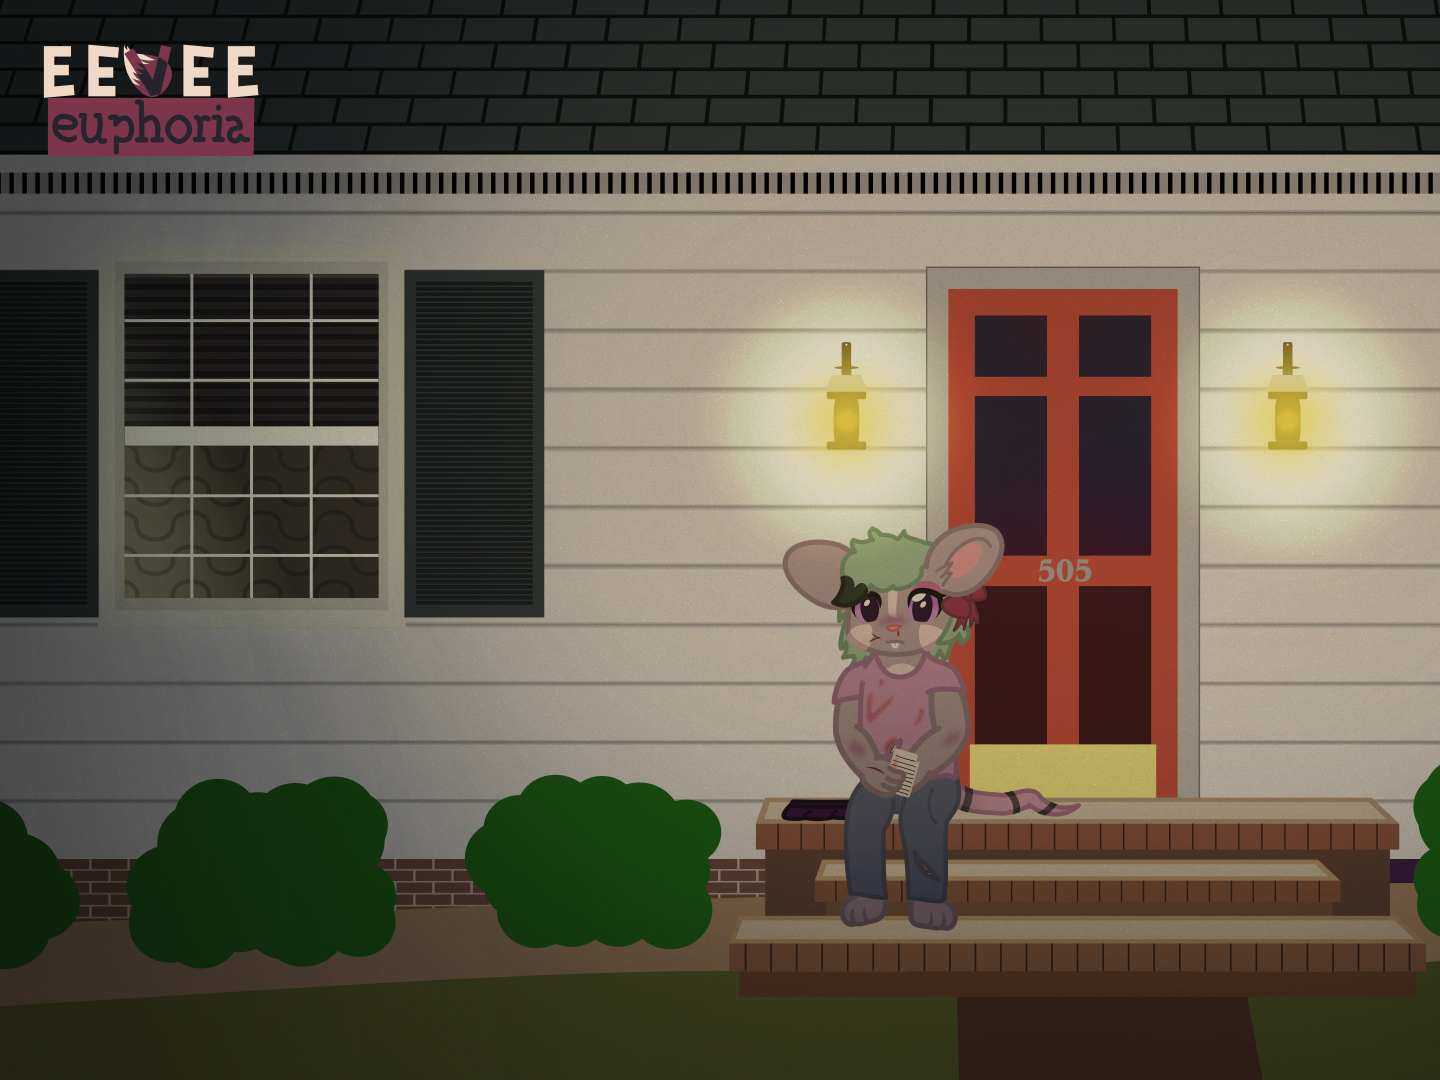 A grey mouse is sitting on the steps outside a house, visibly bruised and bleeding from several places. They are holding a note in their hand, and a light is on in the window to their left.